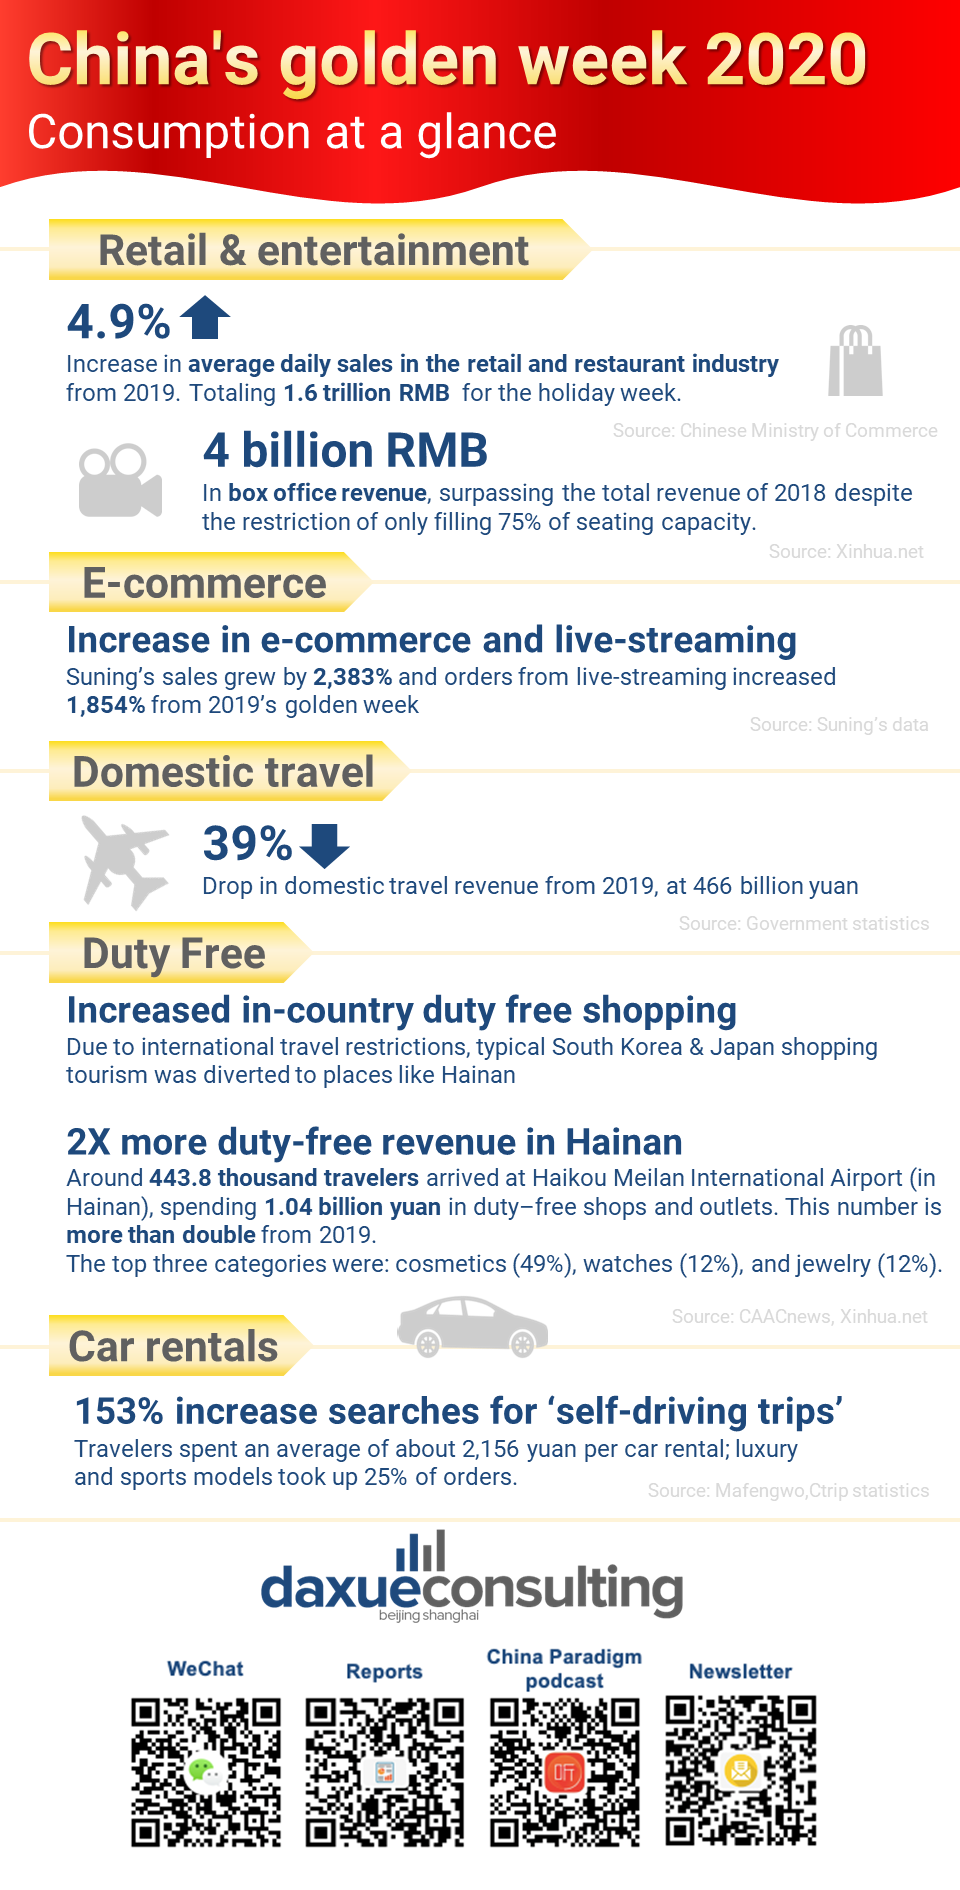 China's 2020 golden week consumption at a glance